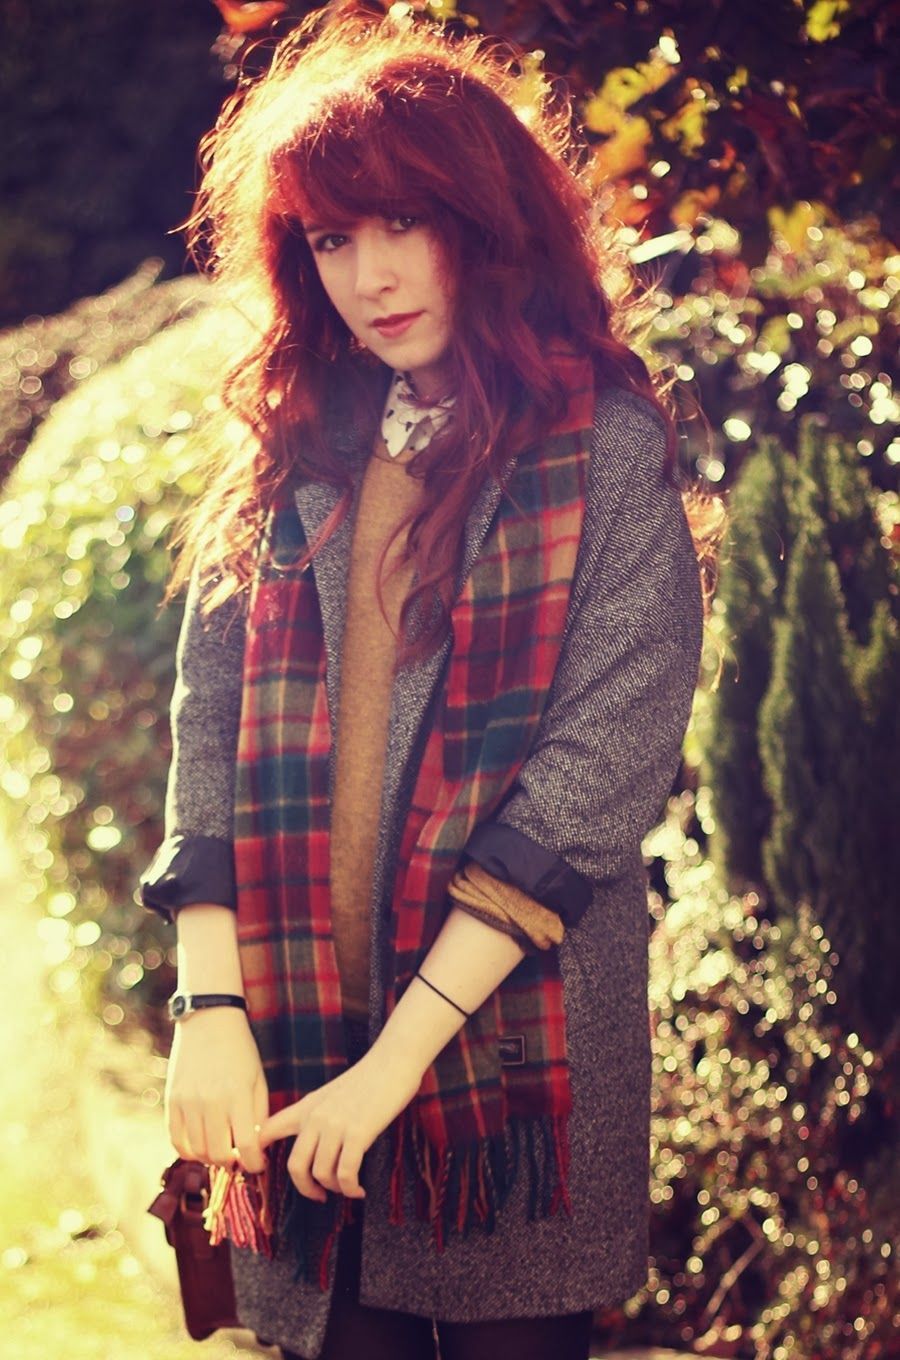 In plaid red redhead